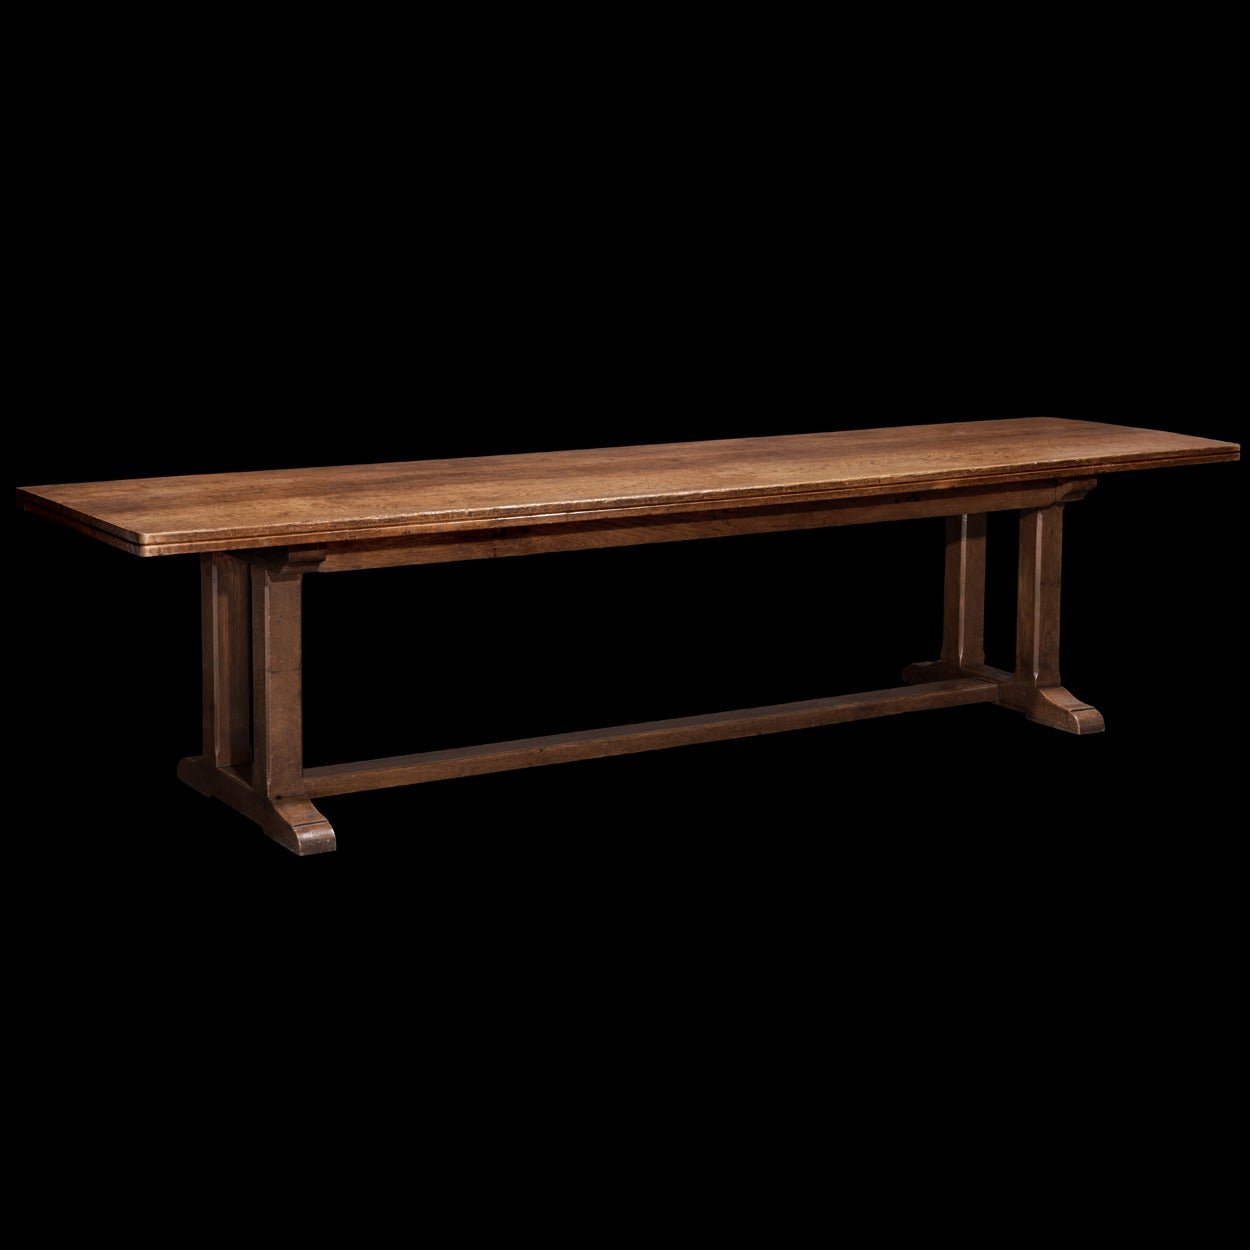 English Arts and Crafts Oak Refectory Table